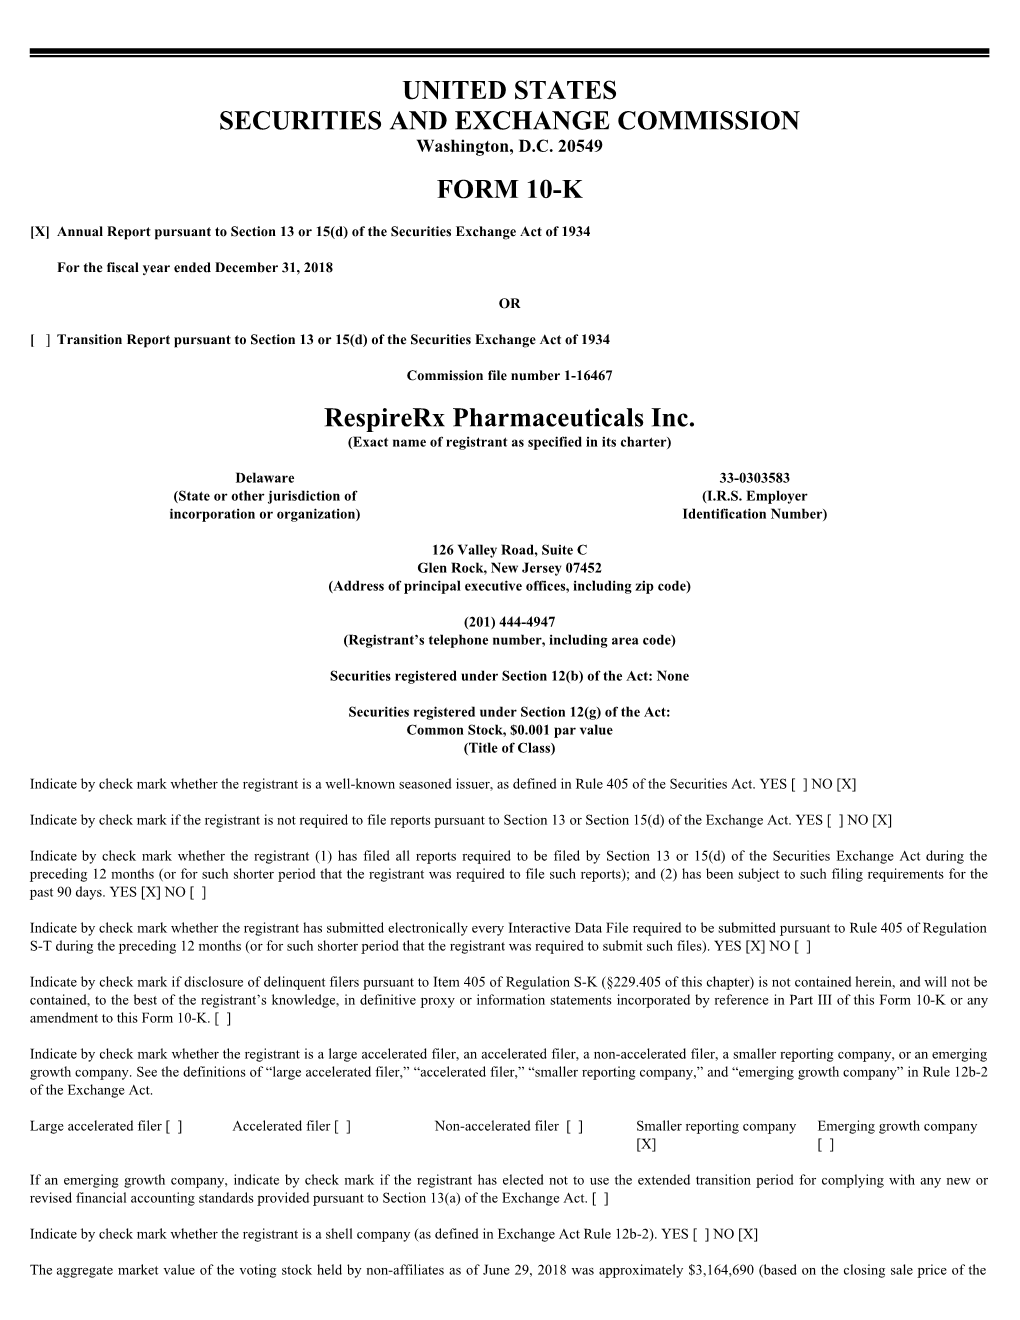 Respirerx Pharmaceuticals Inc. (Exact Name of Registrant As Specified in Its Charter)